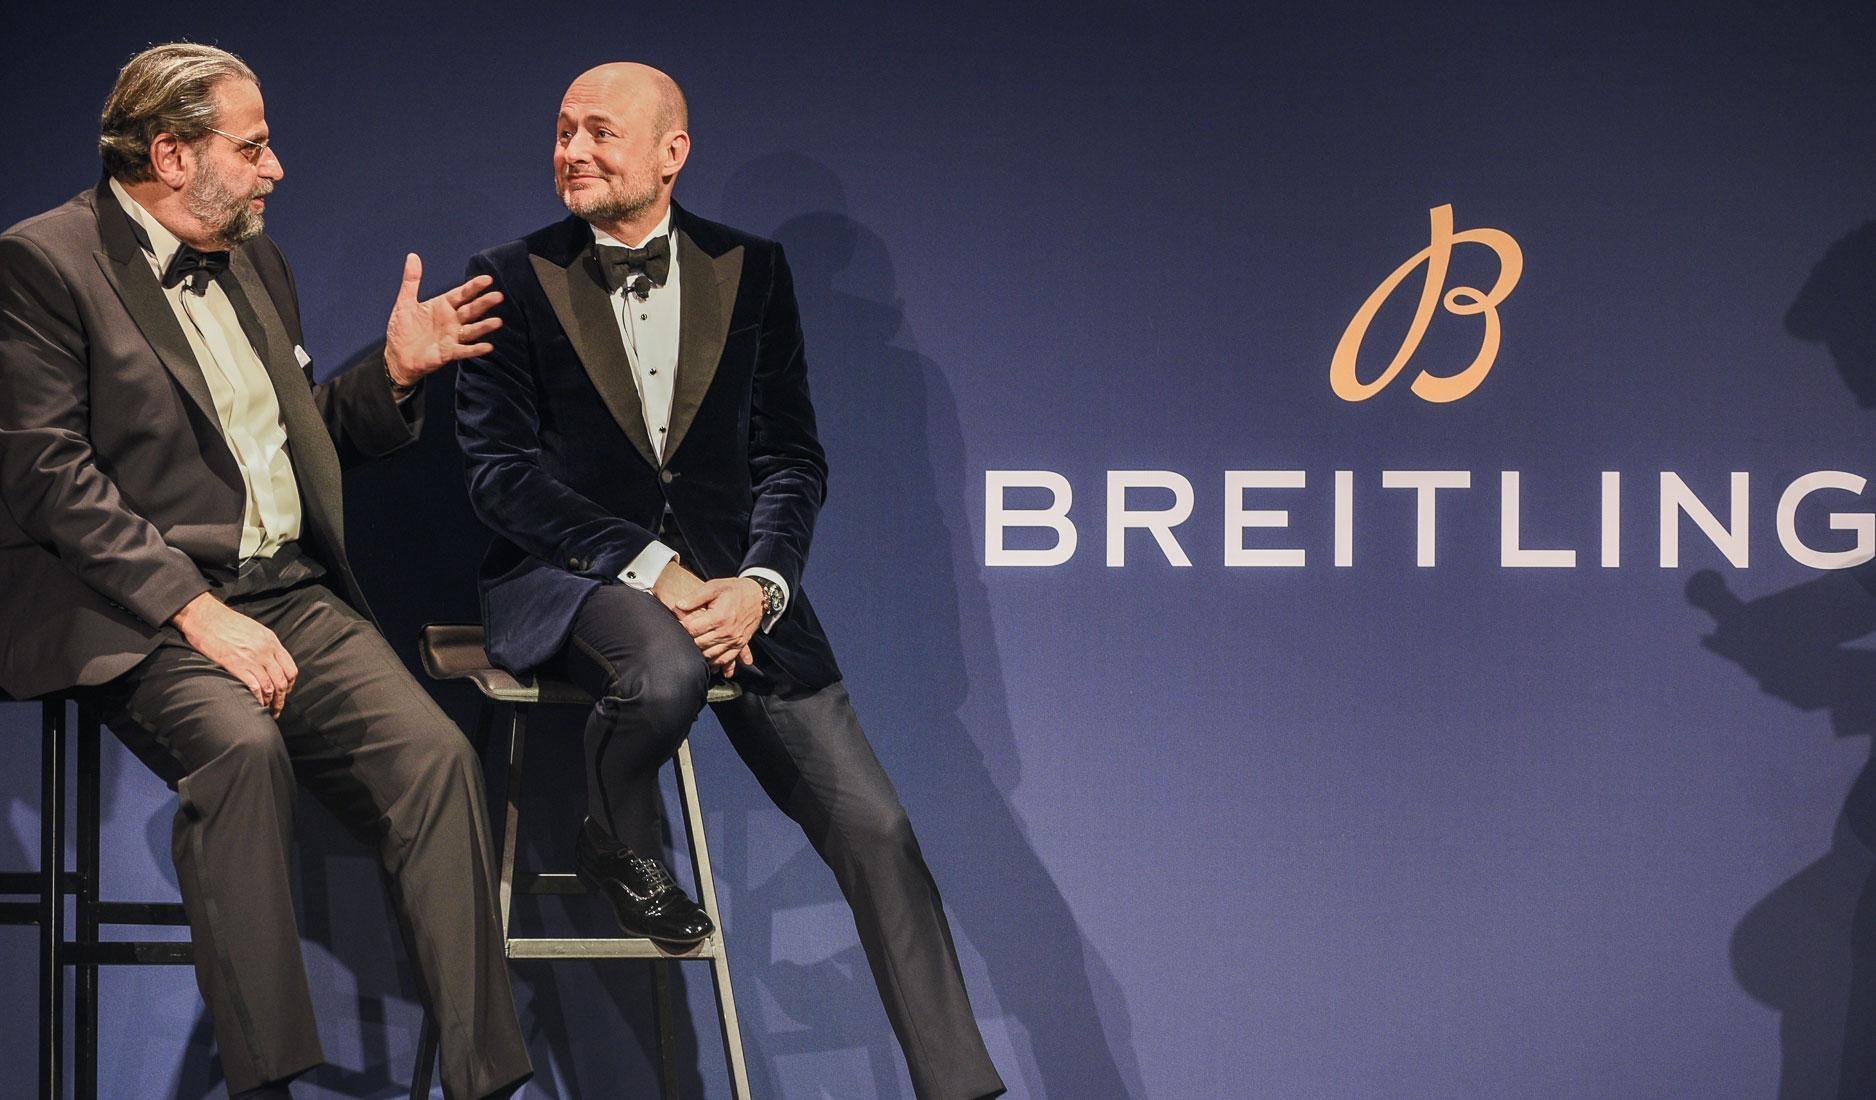 Fred Mandelbaum (left) and Breitling CEO Georges Kern